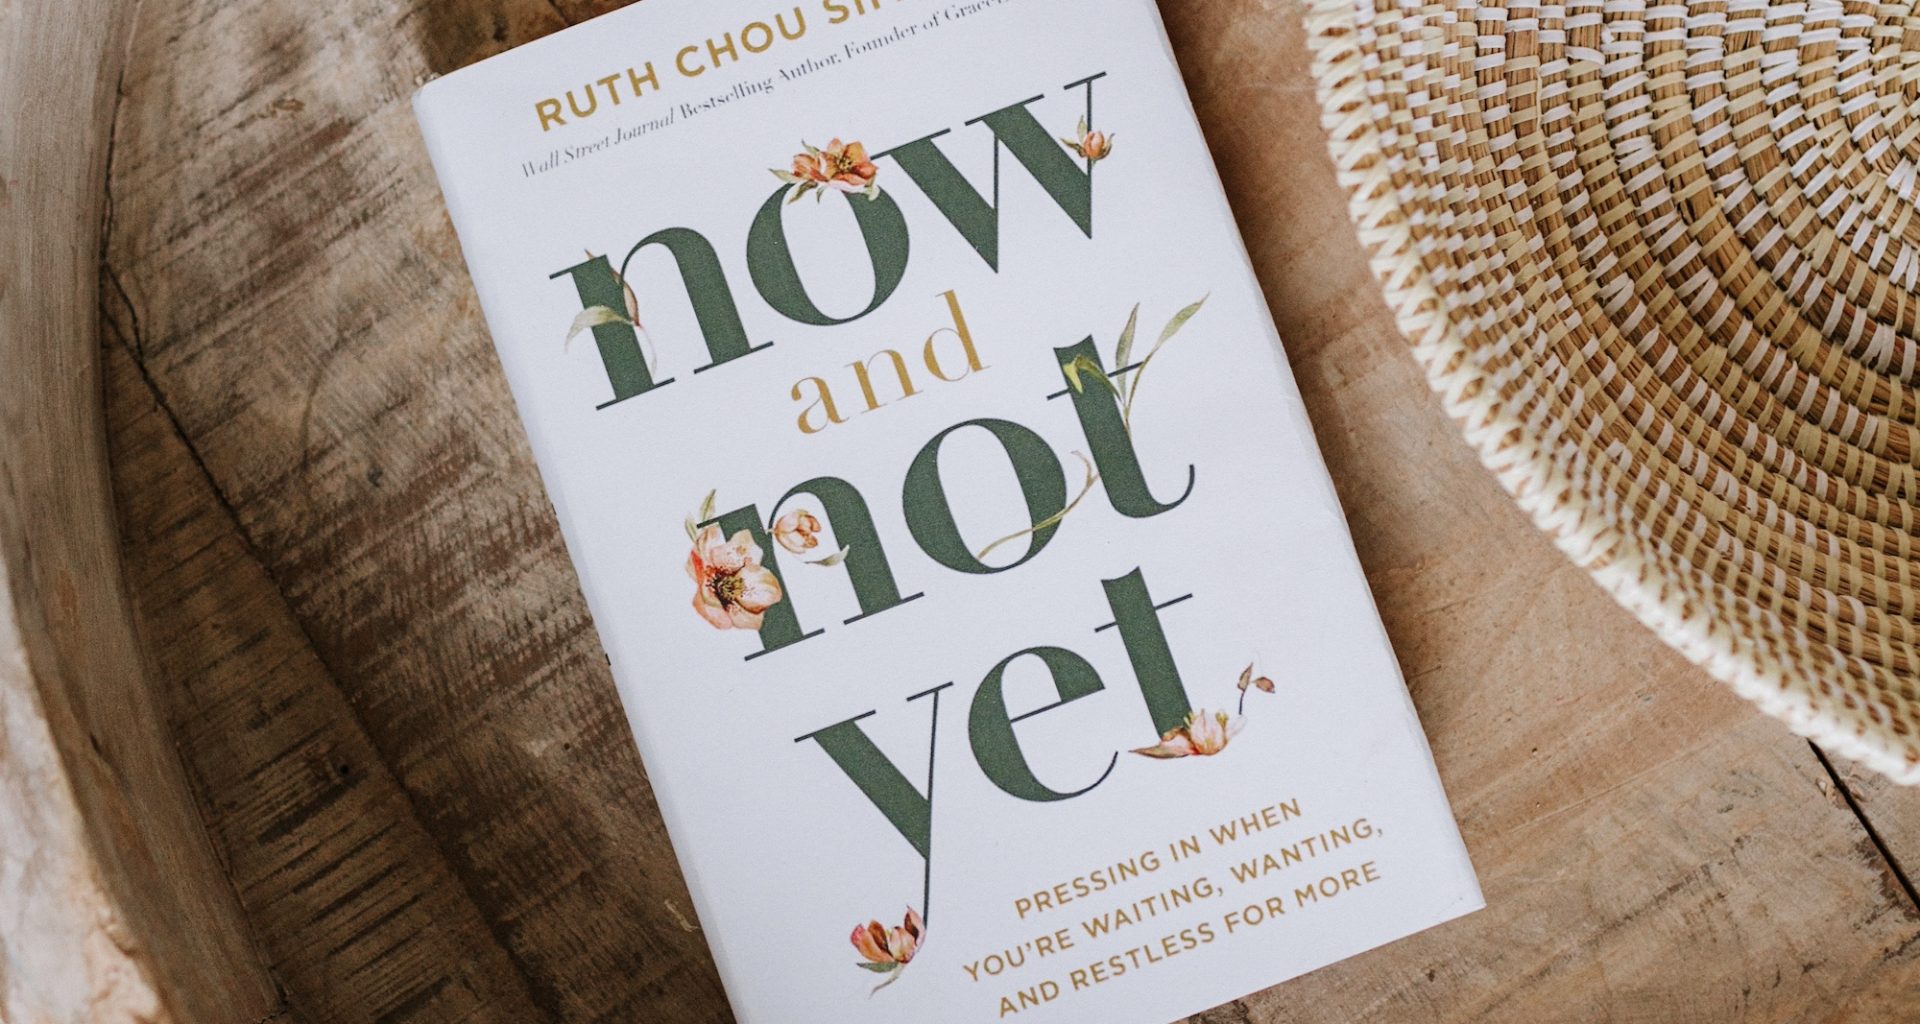 Don’t waste your season: An excerpt from “Now and Not Yet”